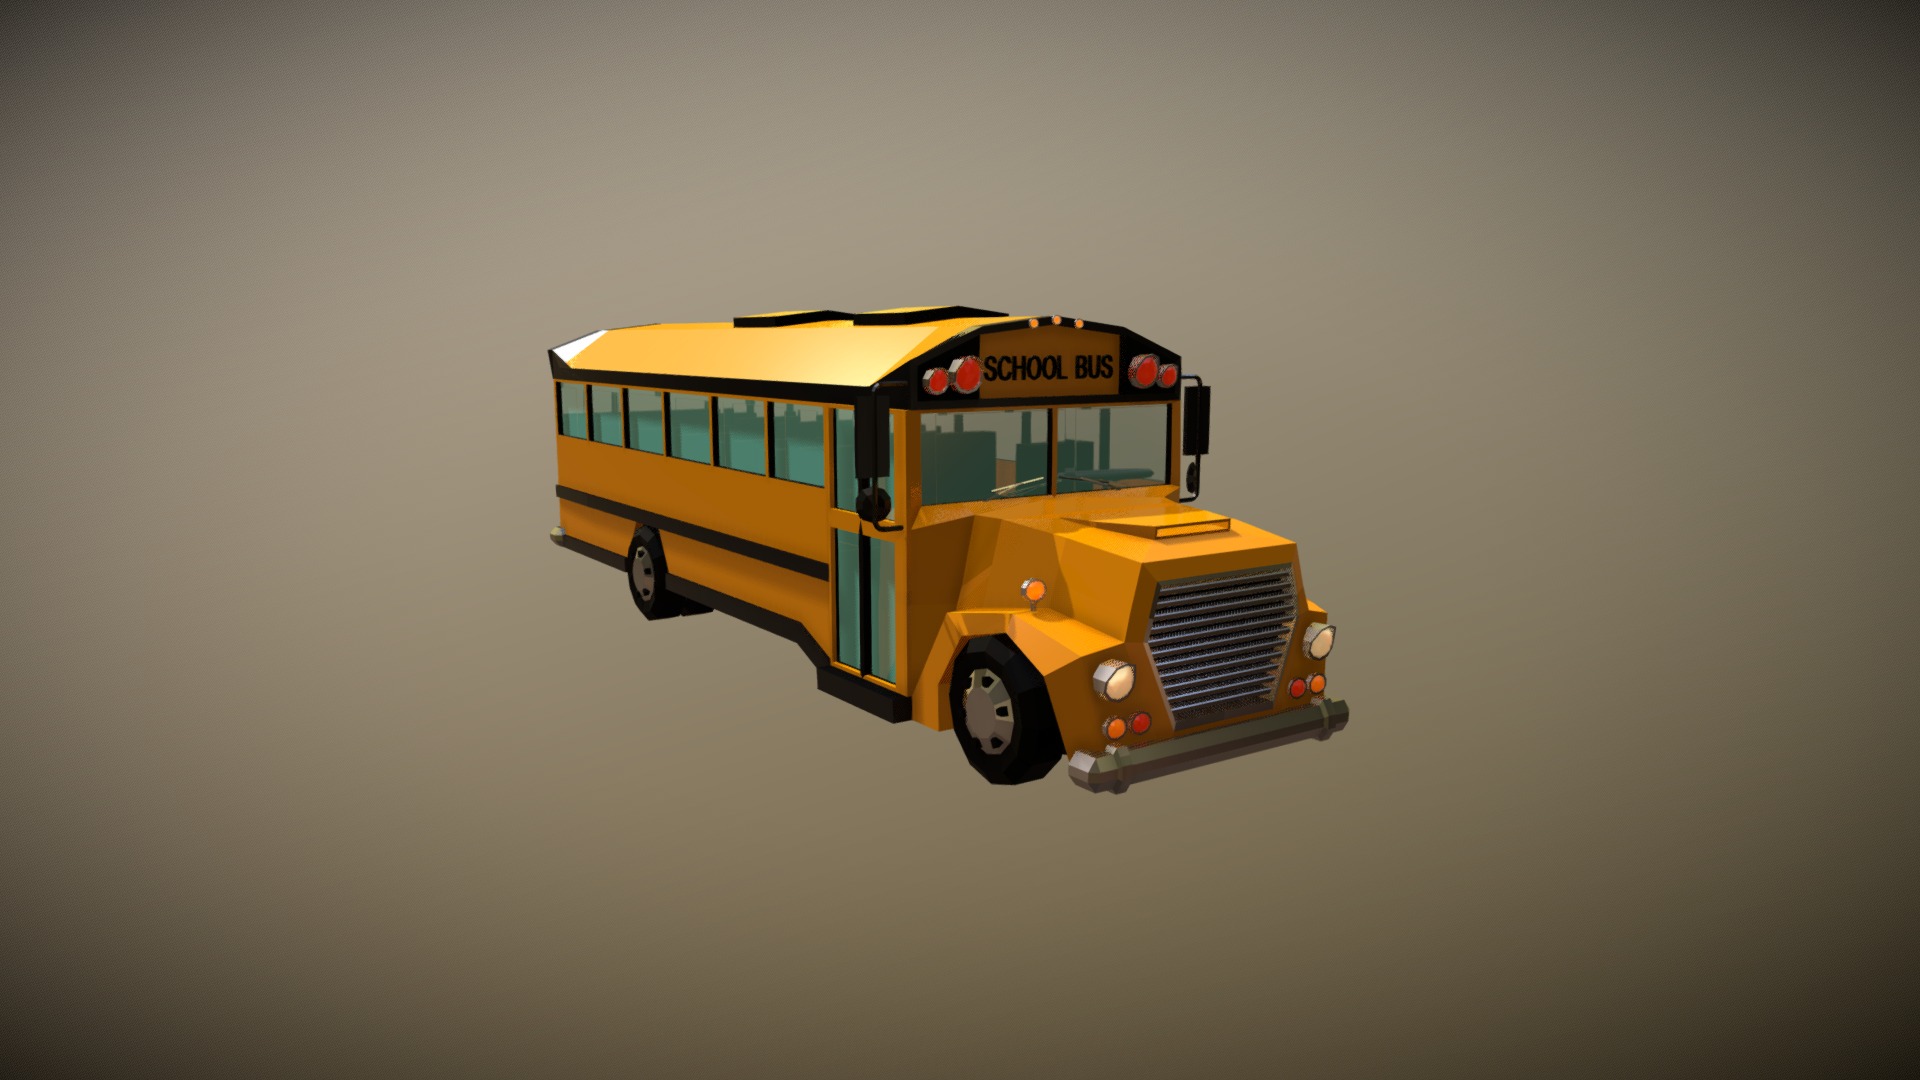 3D model Low Poly School Bus - This is a 3D model of the Low Poly School Bus. The 3D model is about a yellow school bus.